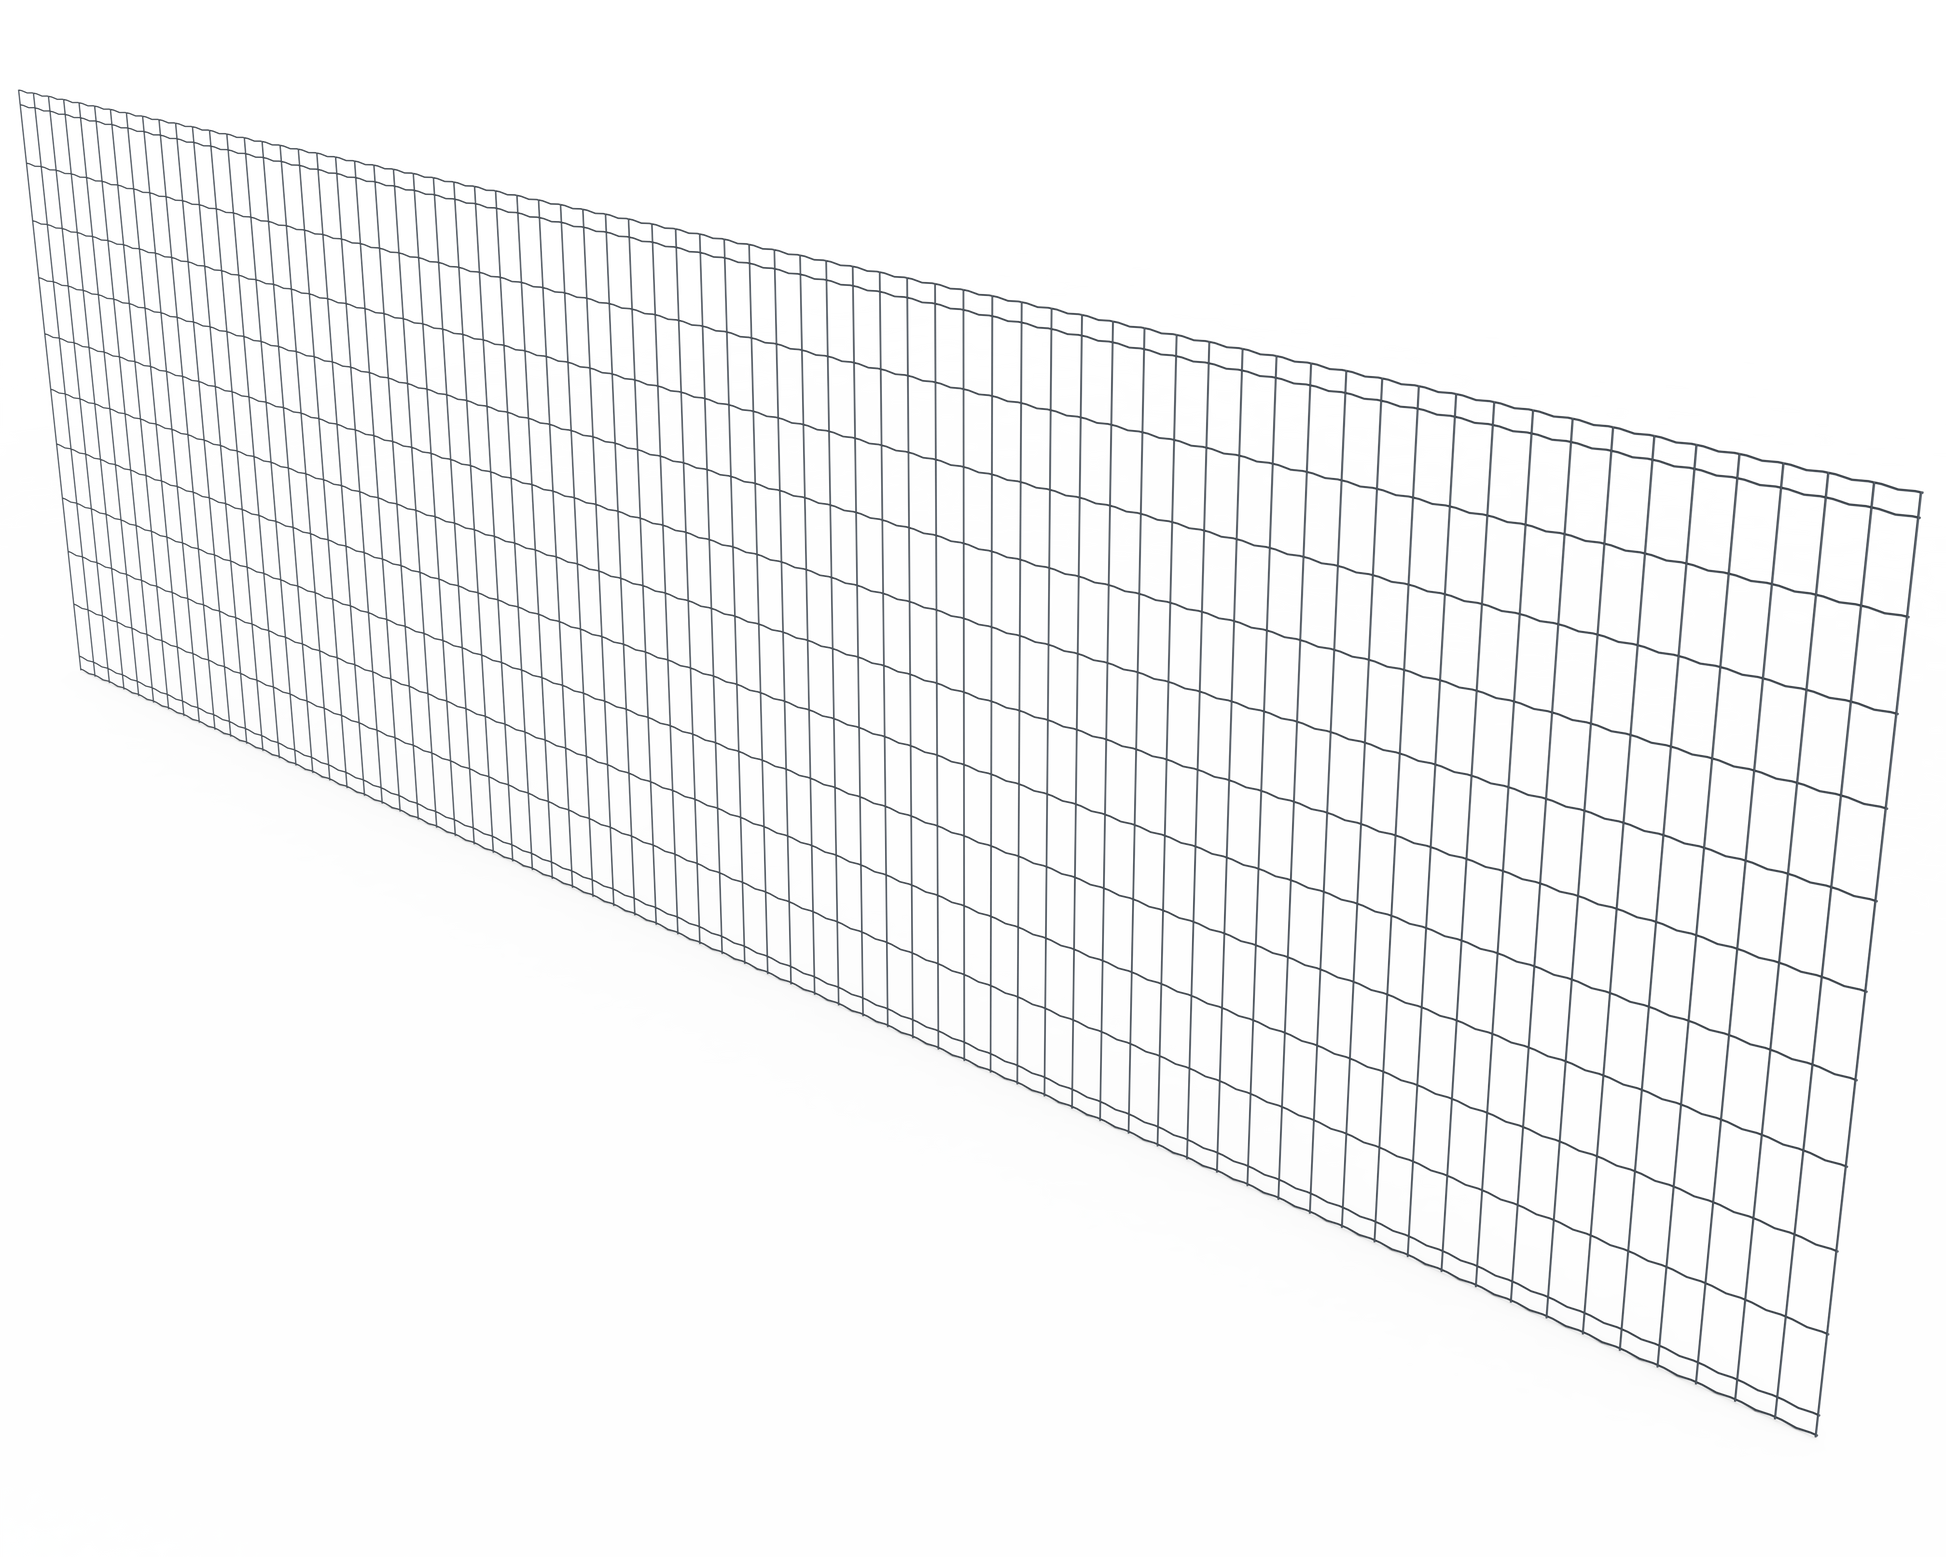 Pantanet Essential Fence 152cm x 25m Anthracite - Isometric | shop.betafence.co.za